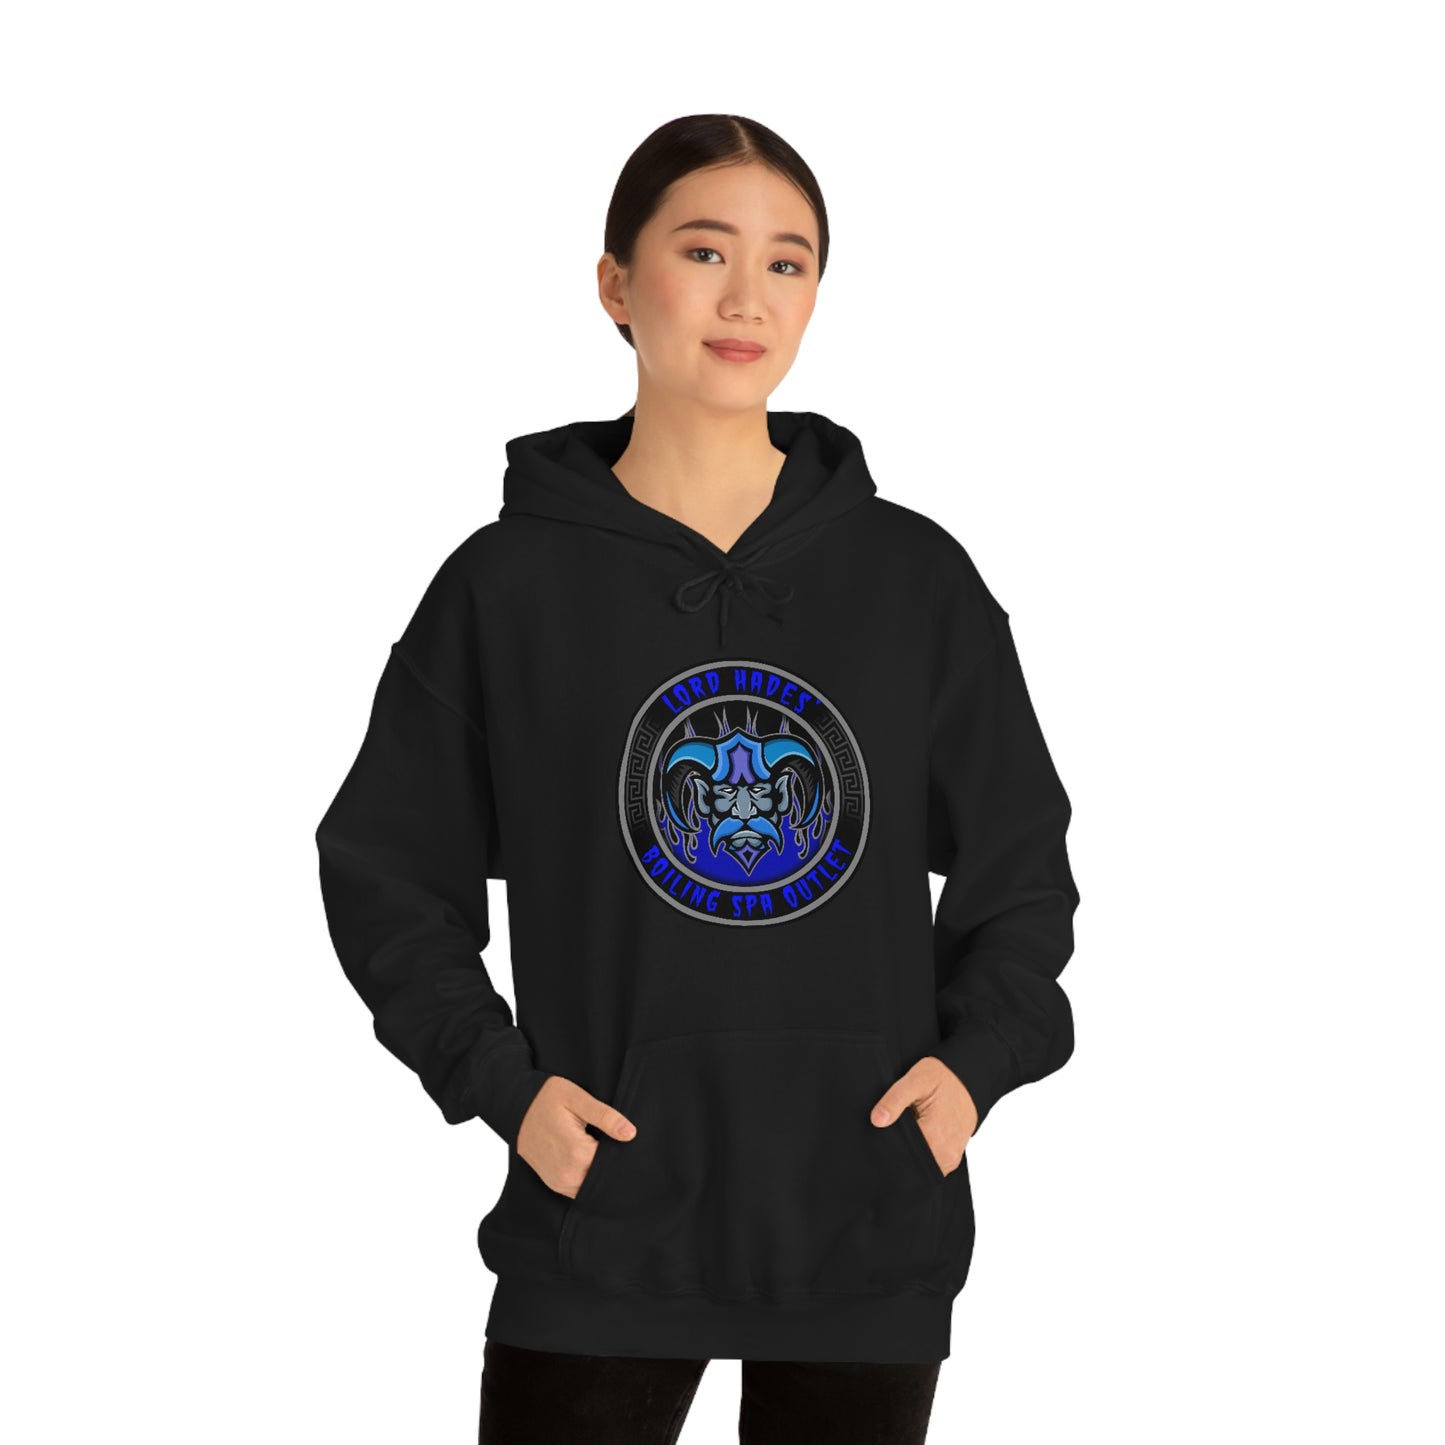 LORD HADES - BOILING SPA OUTLET Unisex Heavy Blend™ Hooded Sweatshirt